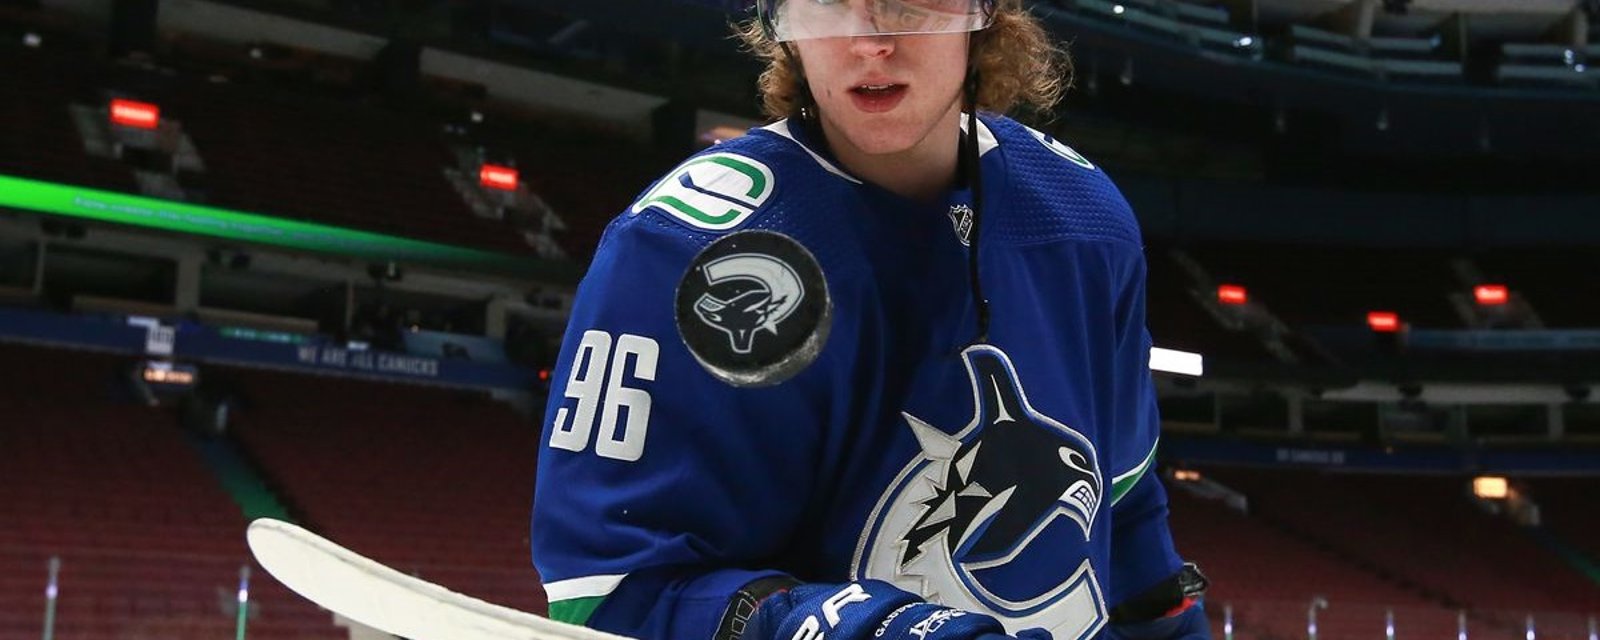 Gaudette responds to accusation he caused the COVID outbreak in Canucks' locker room.